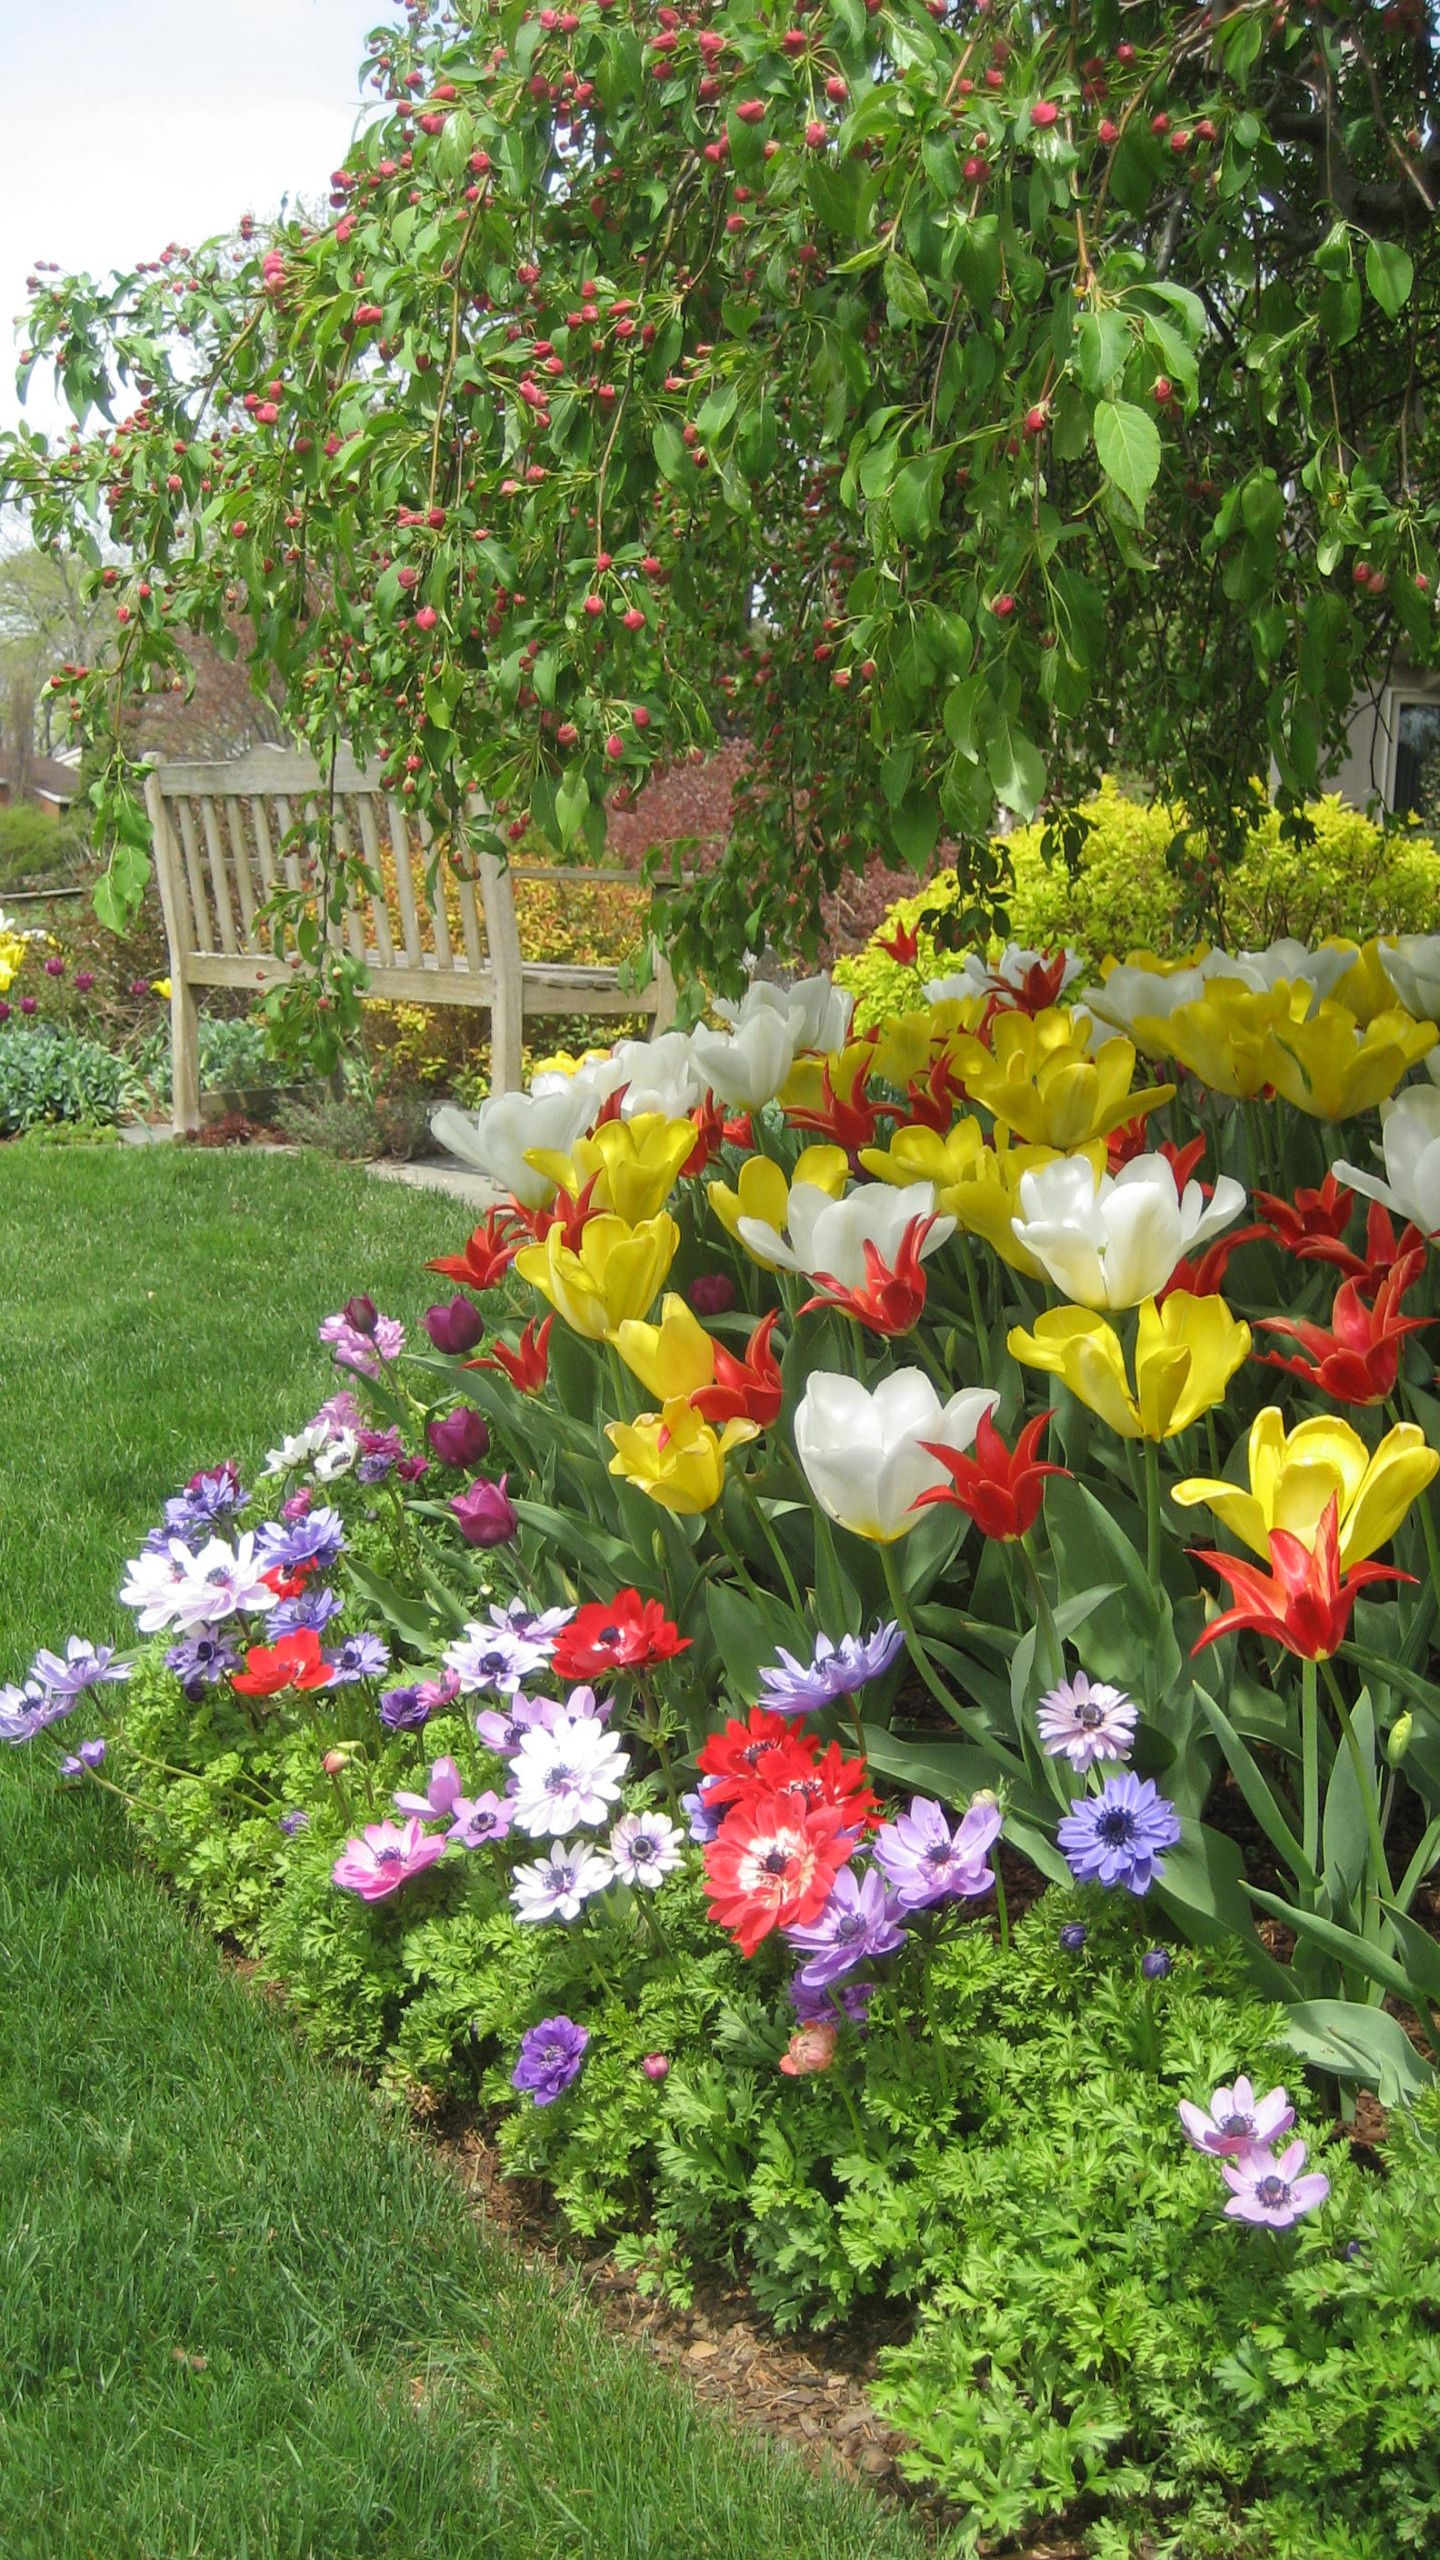 Peter Atkins and Associates specializes in Spring and Summer Bulb Gardens